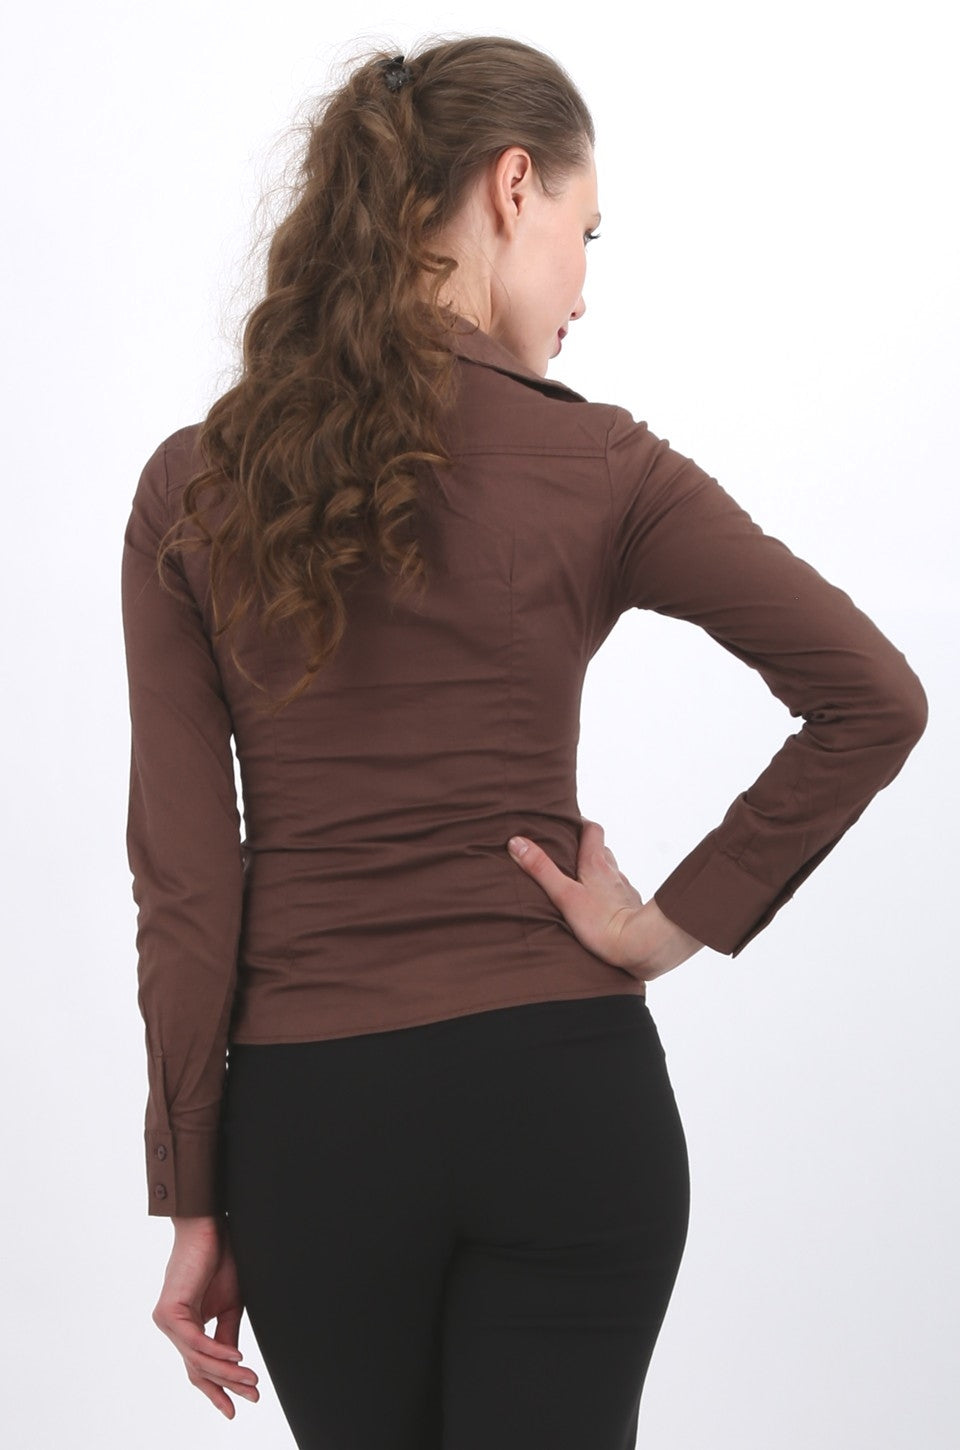 Taylor shirt in brown